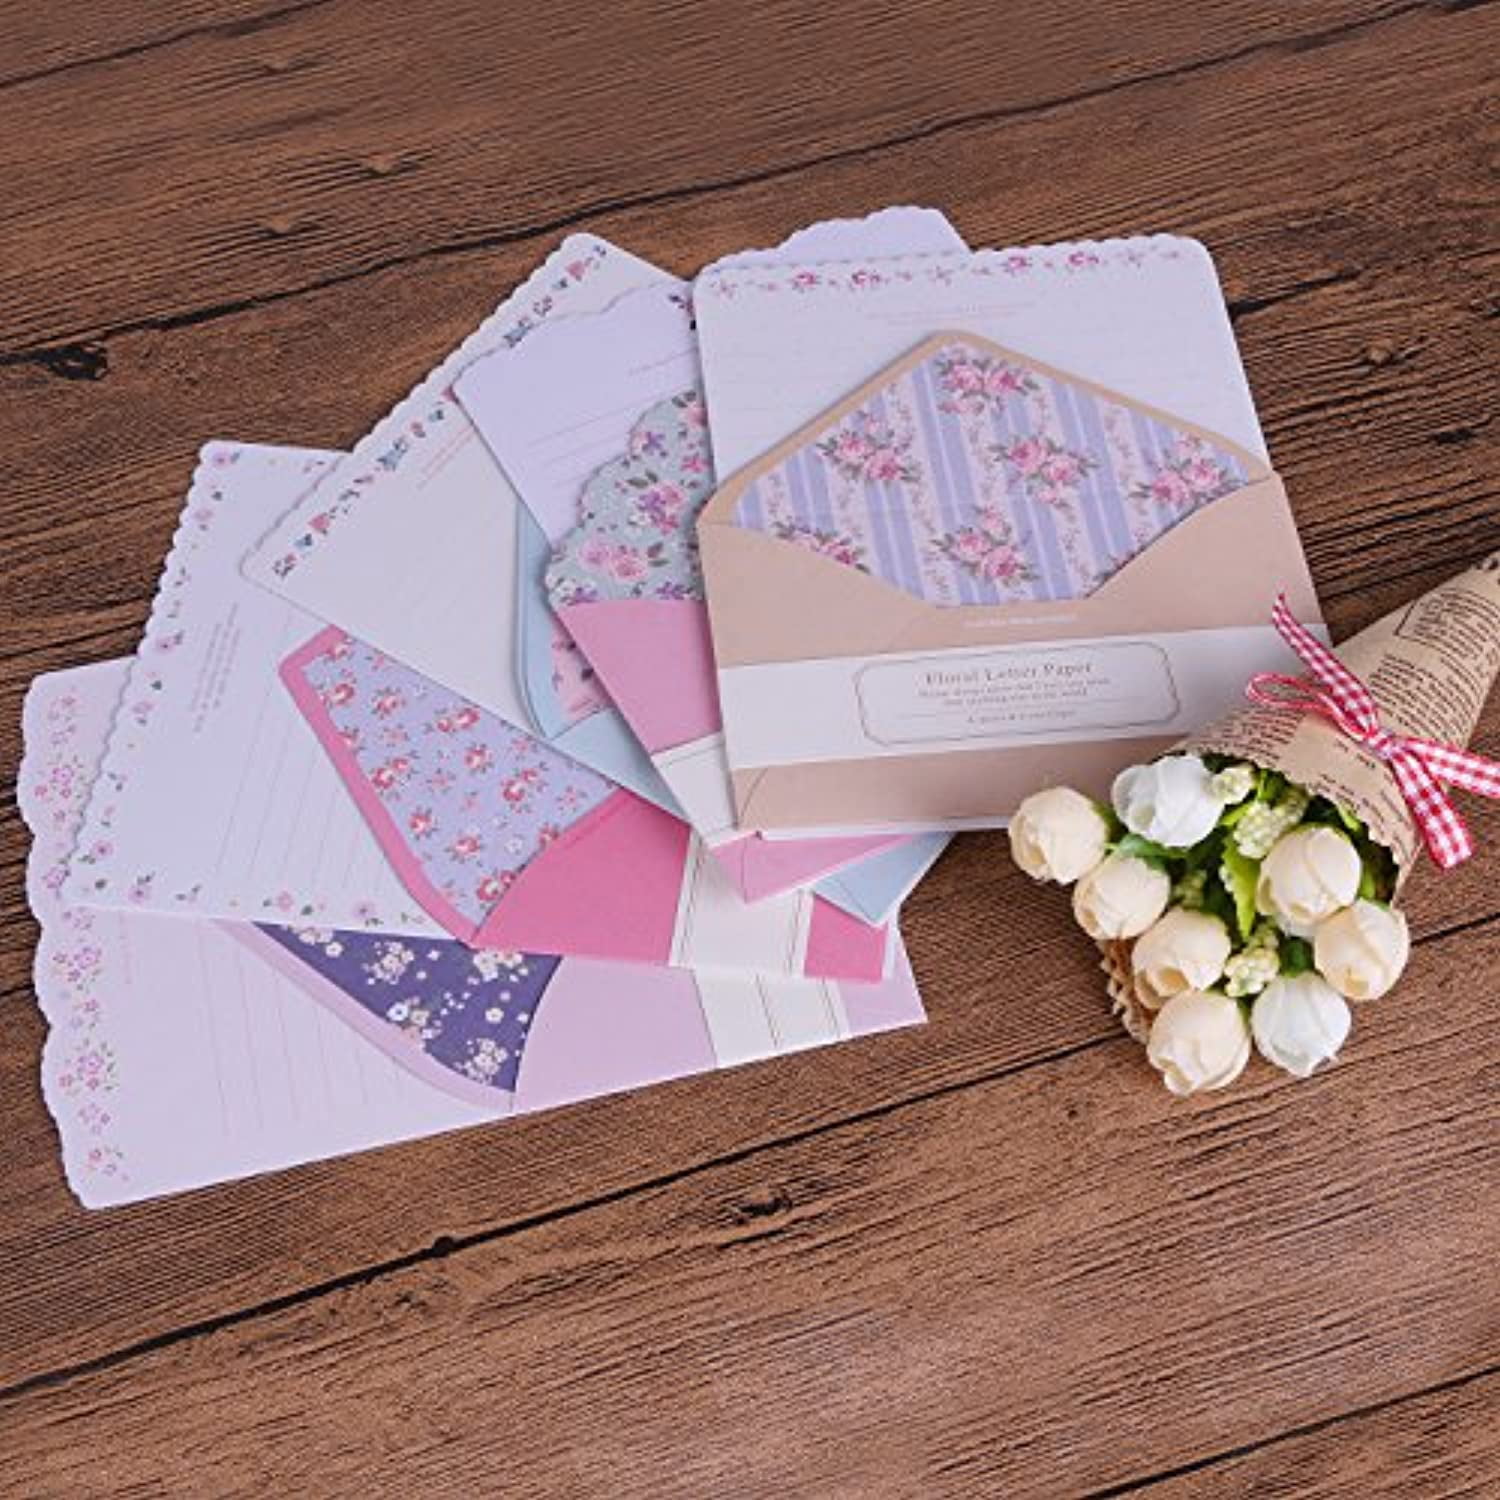 DxJ 32 Cute Lovely Kawaii Special Design Writing Stationery Paper with 16 Navy Style Envelopes,Stationary Paper and Envelopes Set